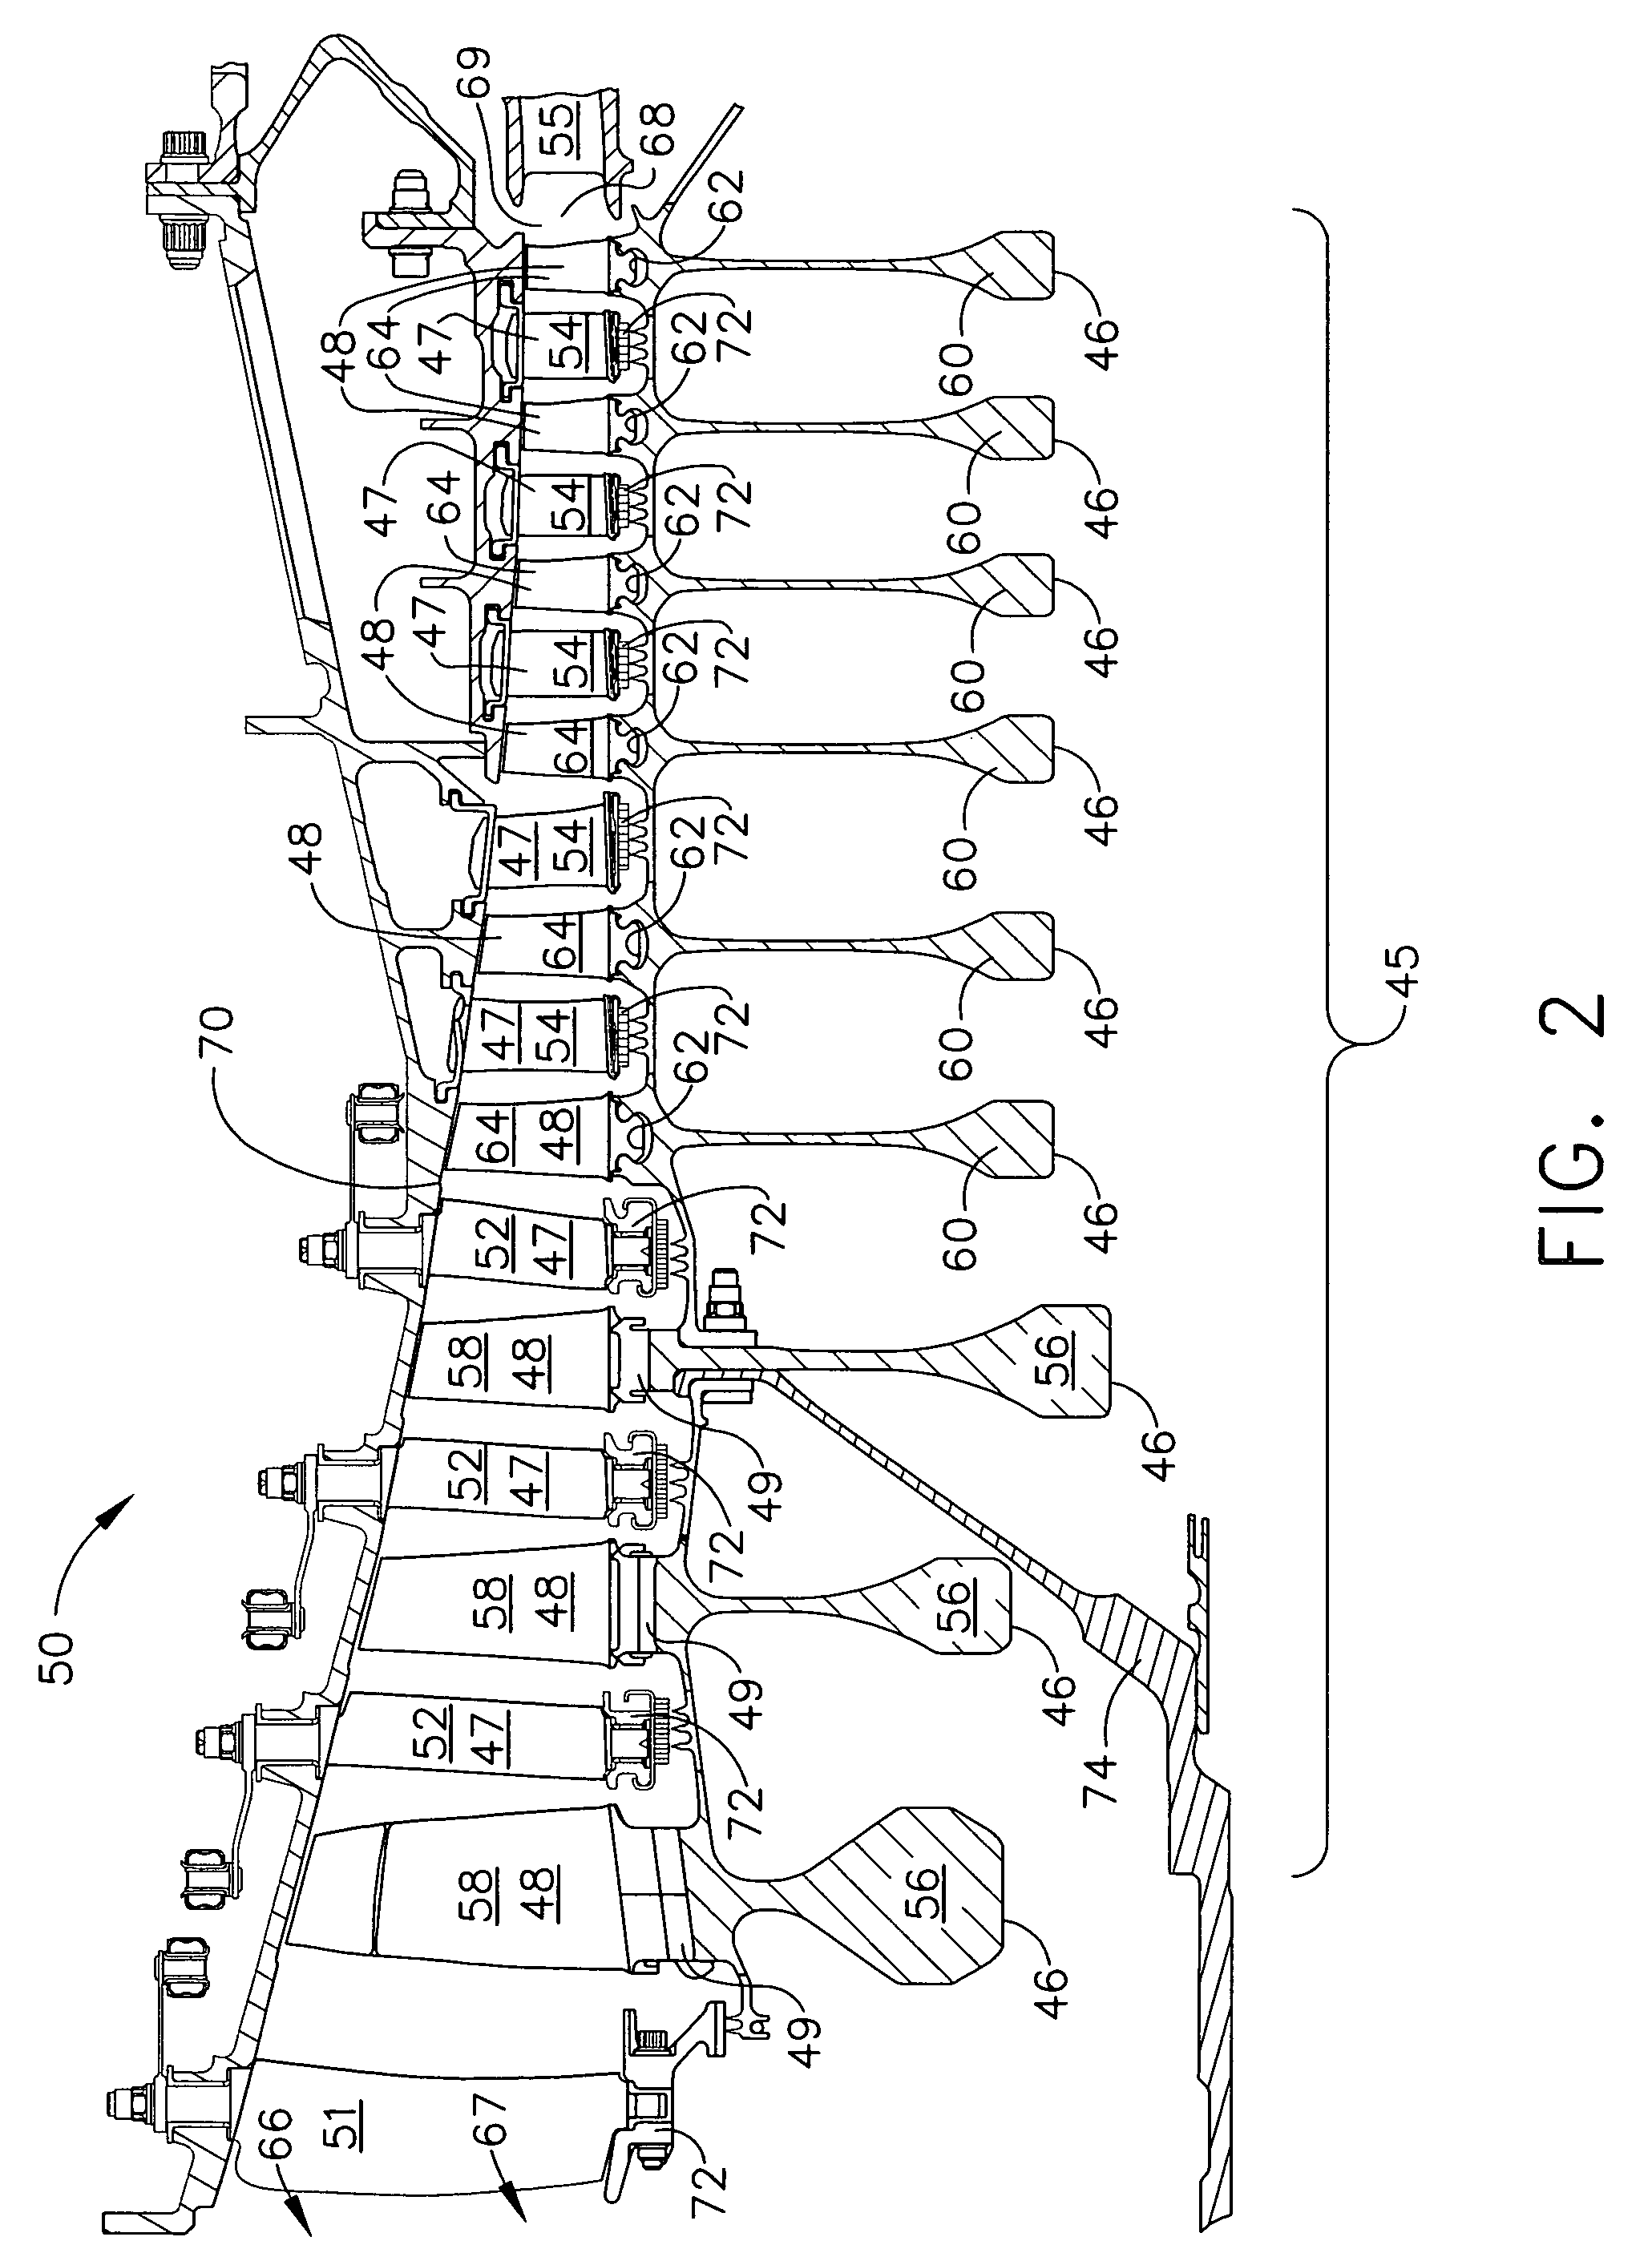 Methods and apparatus for machining components